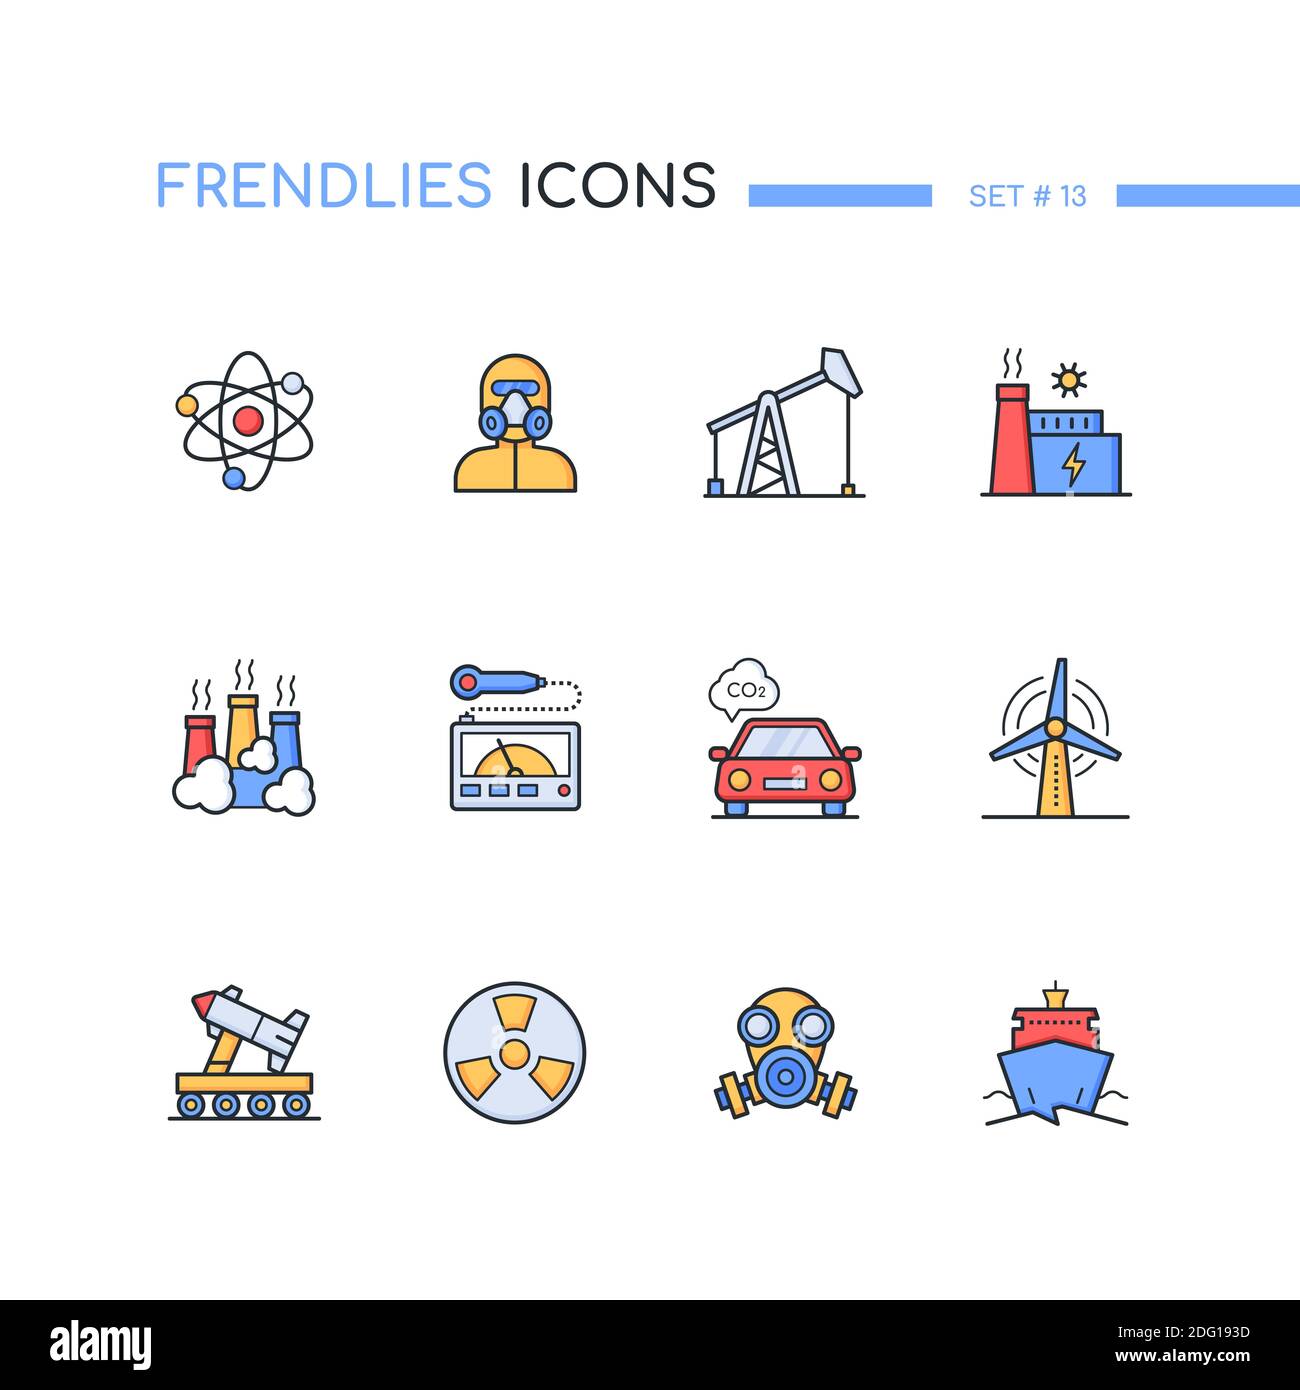 Nuclear elements - modern line design style icons set. Oil industry and environment idea. Images of a power plant, pump, atom, radiation detector, car Stock Vector